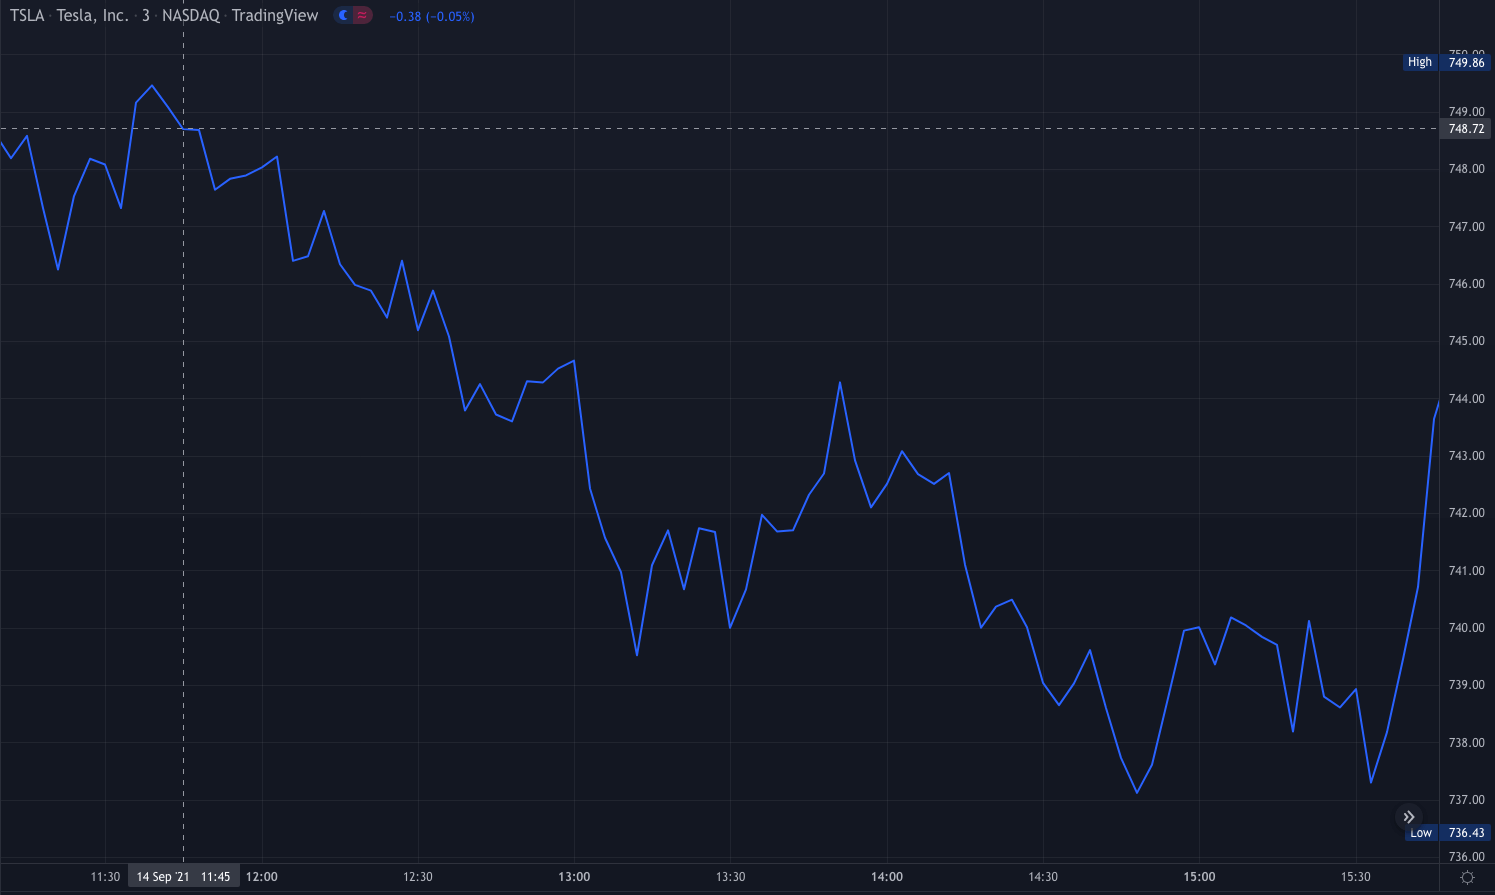 TSLA TradingView chart showing a downward trend starting after golden sweeps are reported